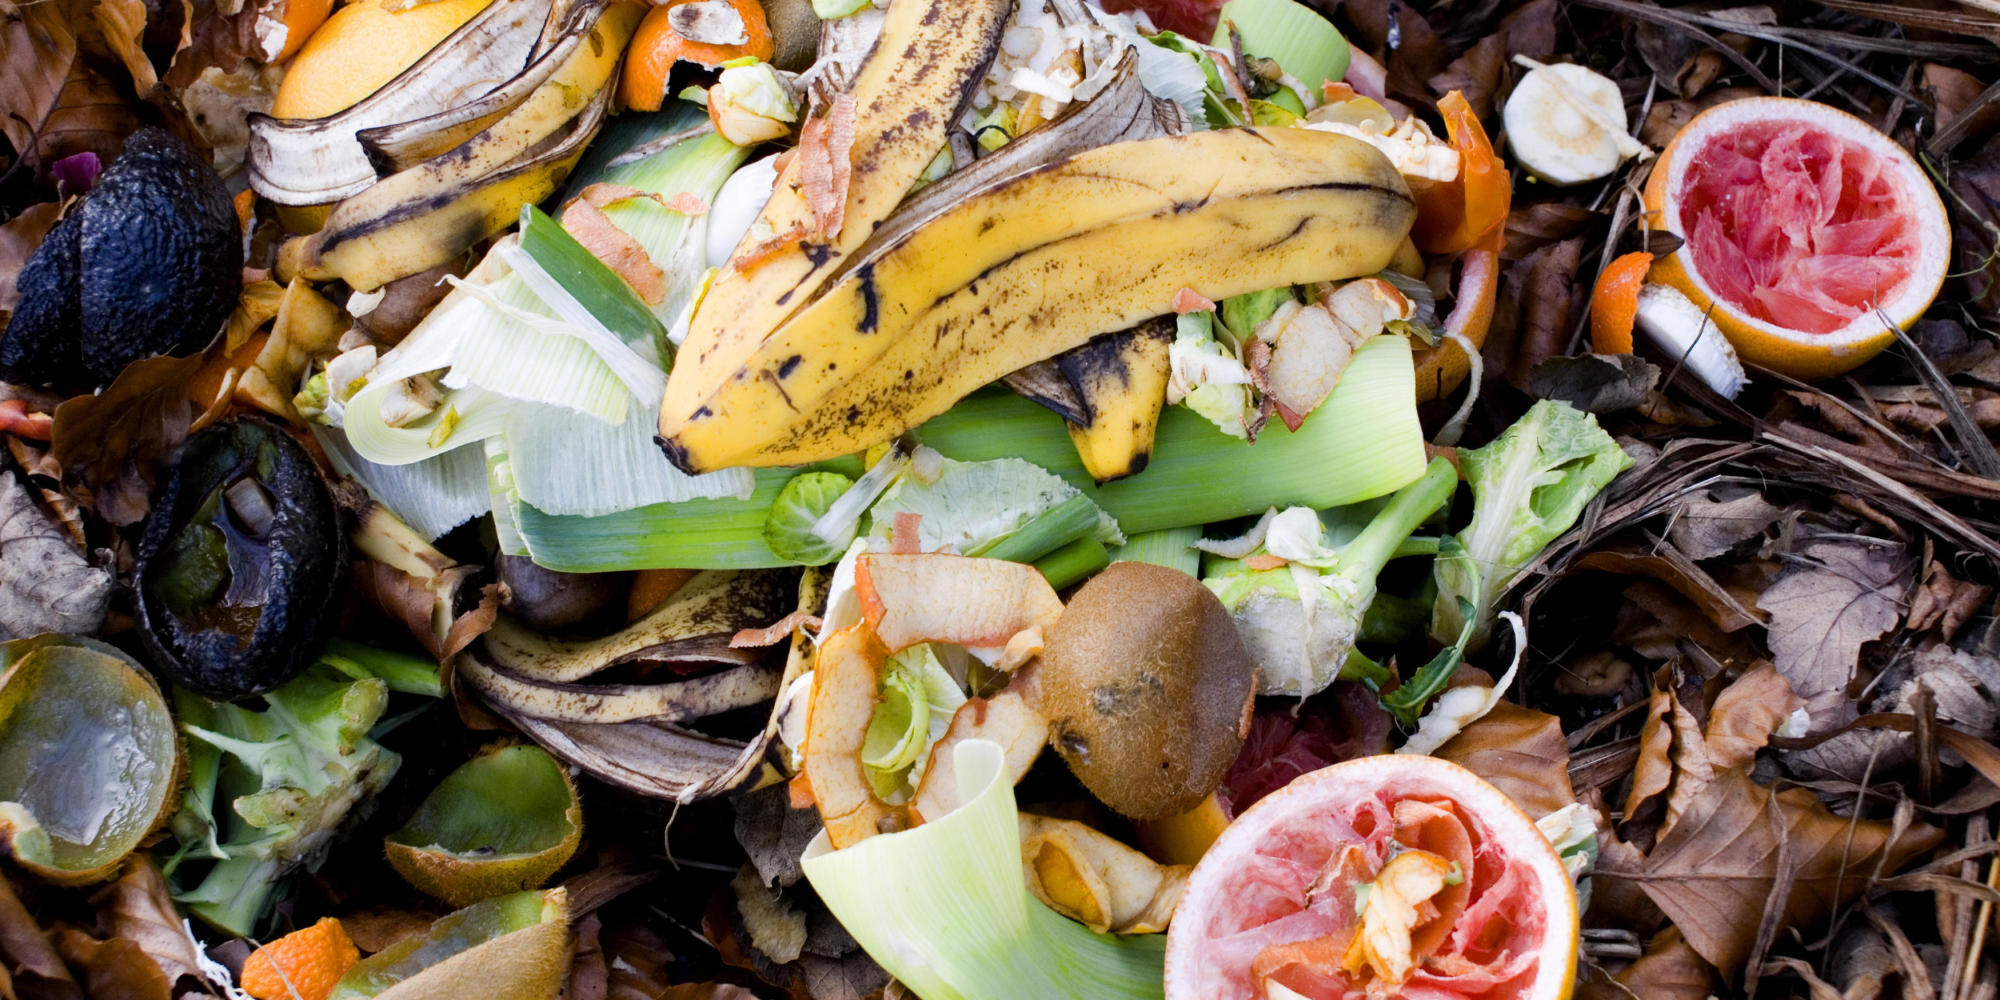 Food waste on compost heap